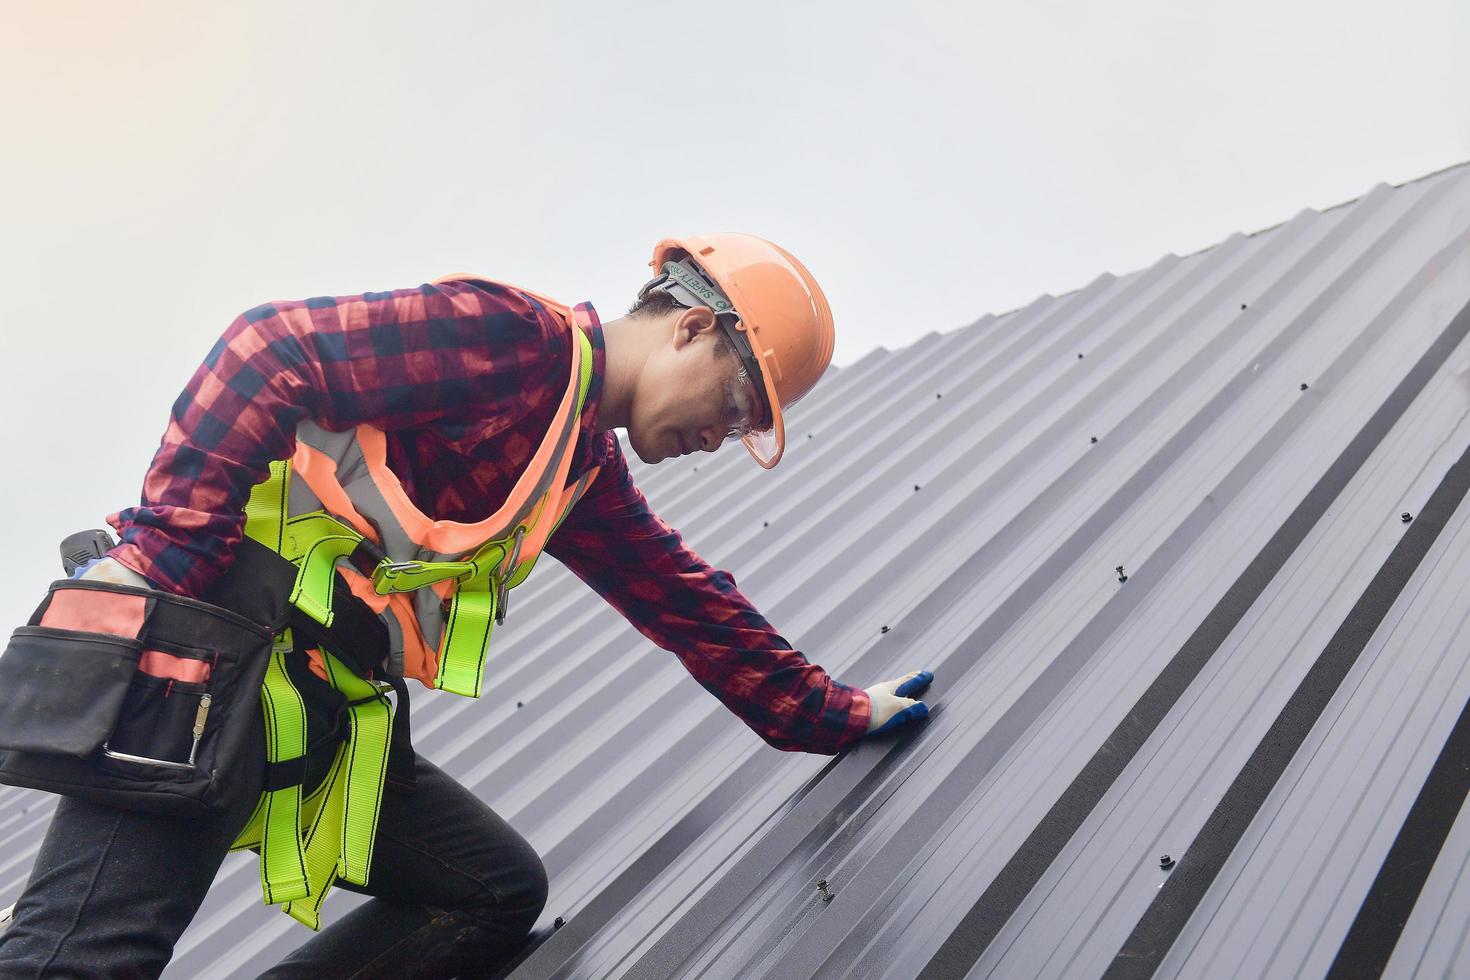 https://static.vecteezy.com/system/resources/previews/015/632/734/non_2x/roofer-worker-in-protective-uniform-wear-and-gloves-roofing-tools-installing-new-roofs-under-construction-electric-drill-used-on-new-roofs-with-metal-sheet-free-photo.jpg